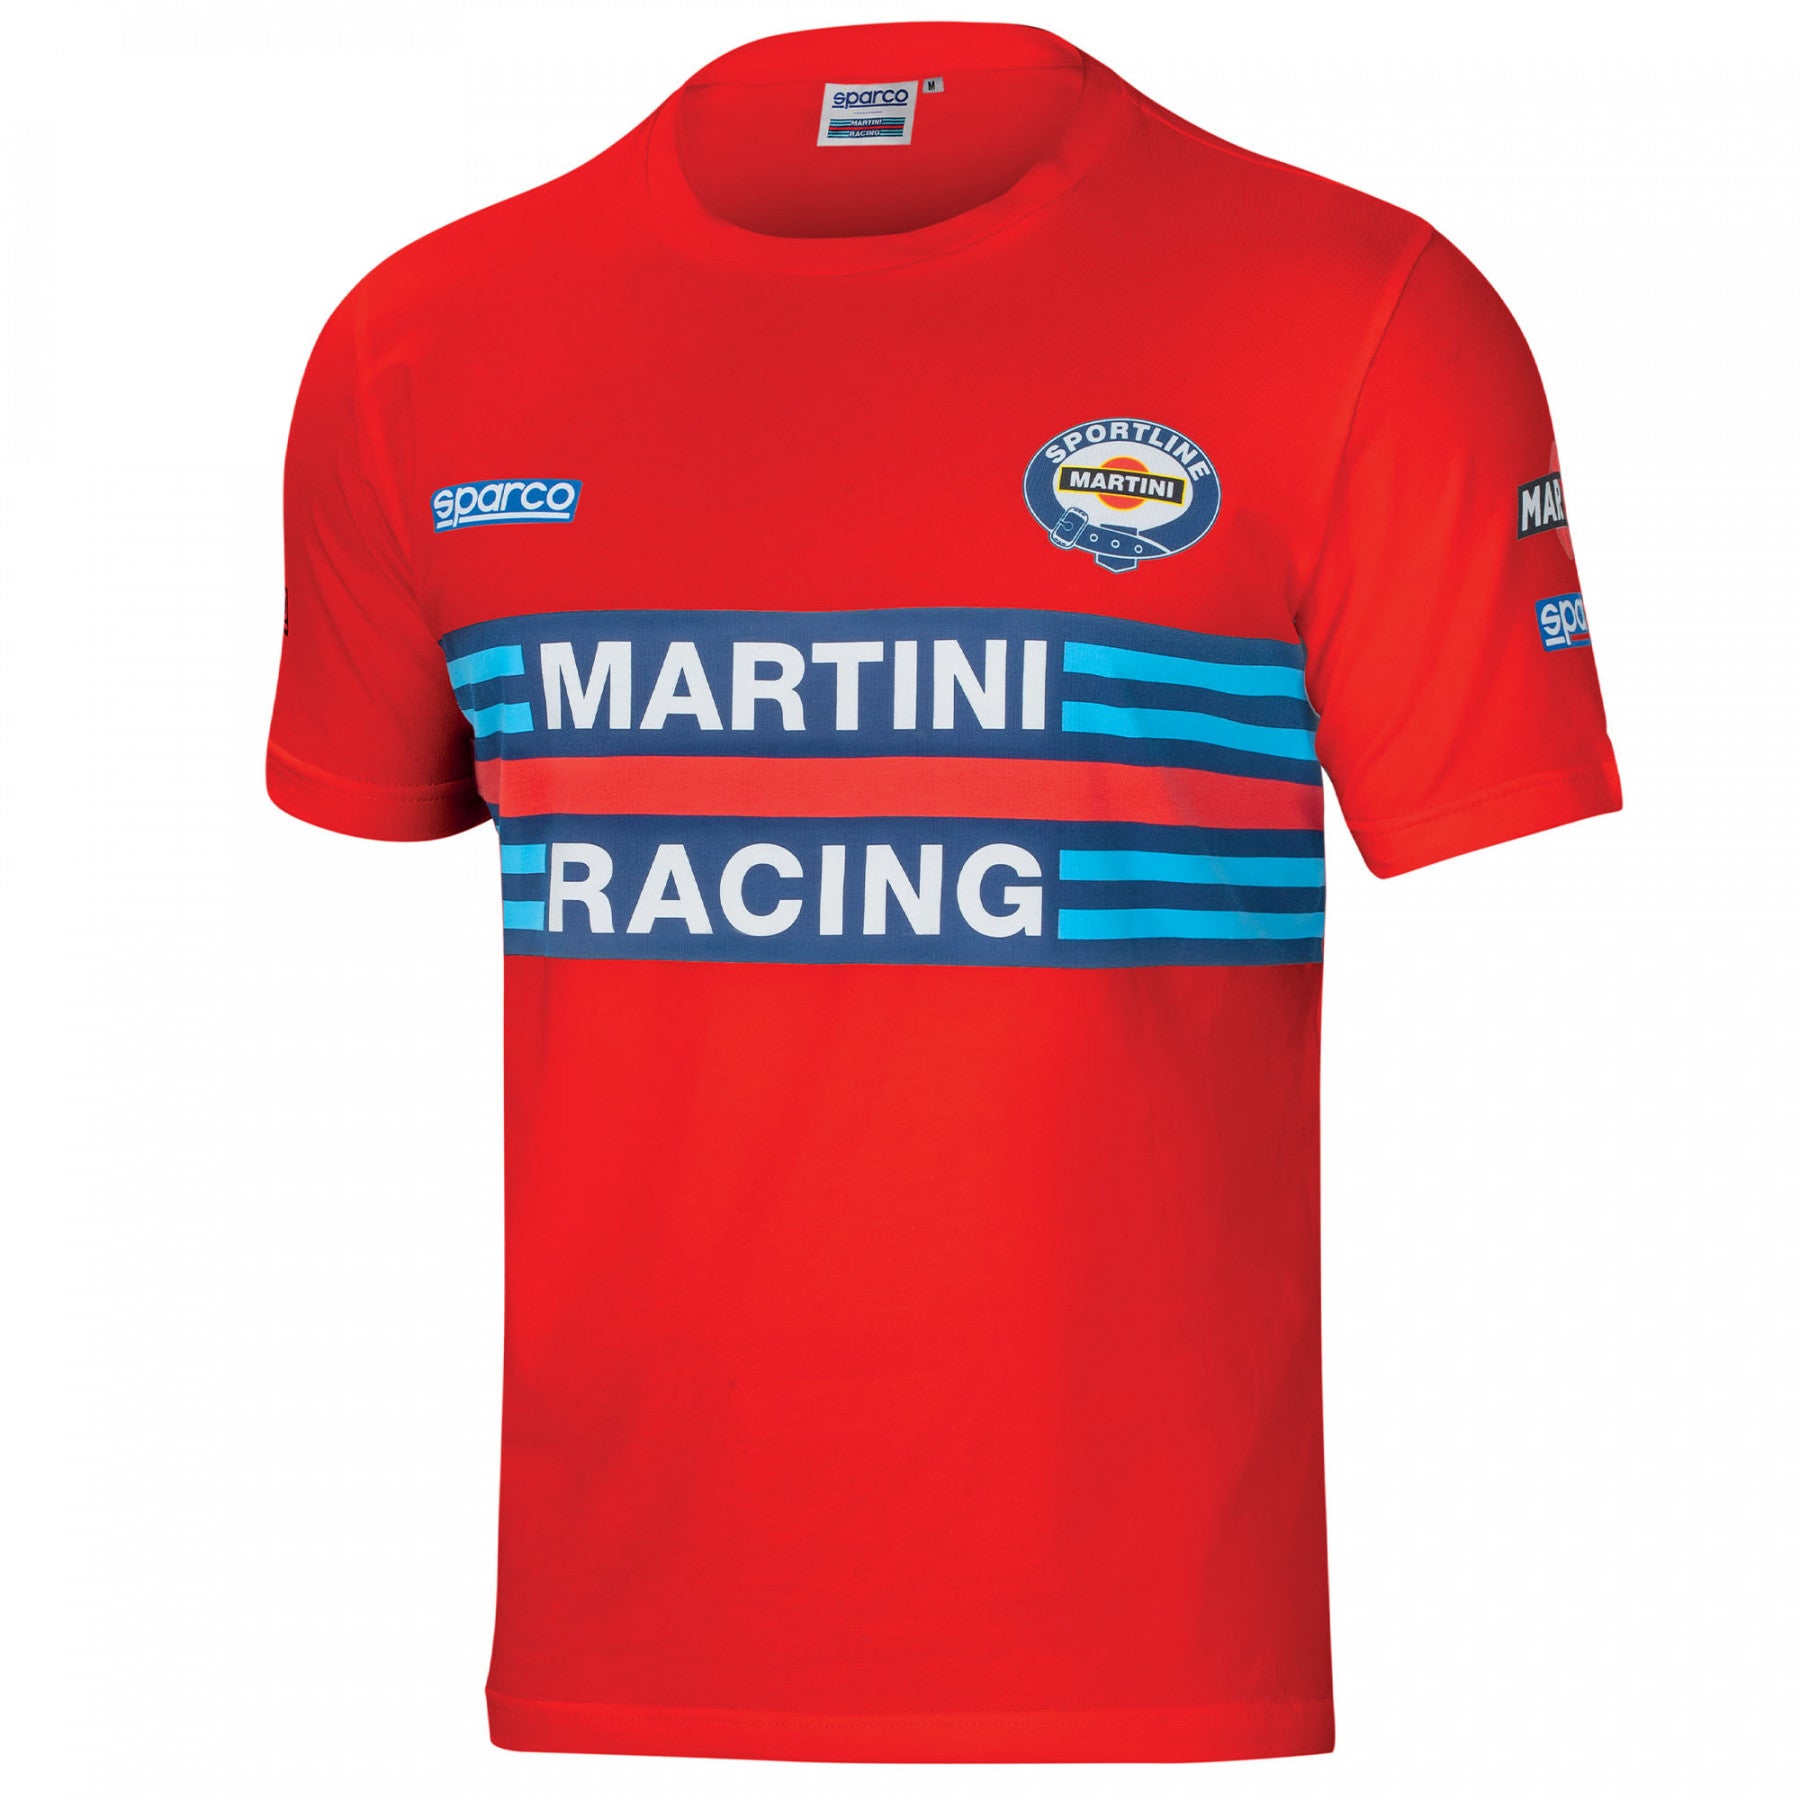 SPARCO 01274MRRS0XS T-shirt MARTINI RACING, red, size XS Photo-0 